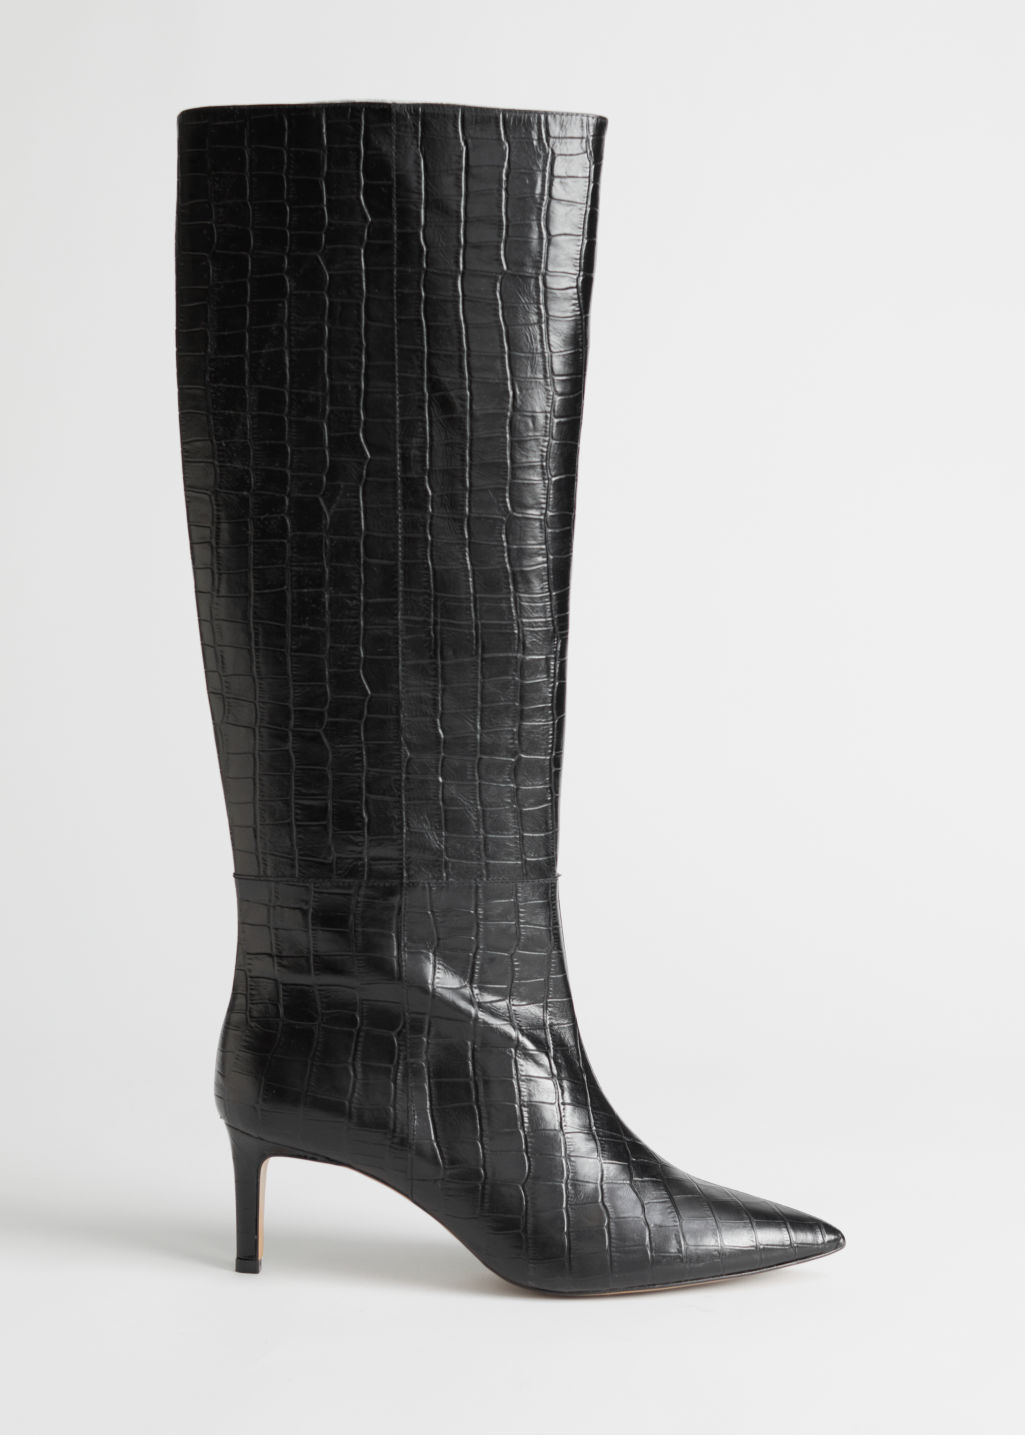 Croc Leather Knee High Boots - Black Croc - Knee high boots - & Other Stories